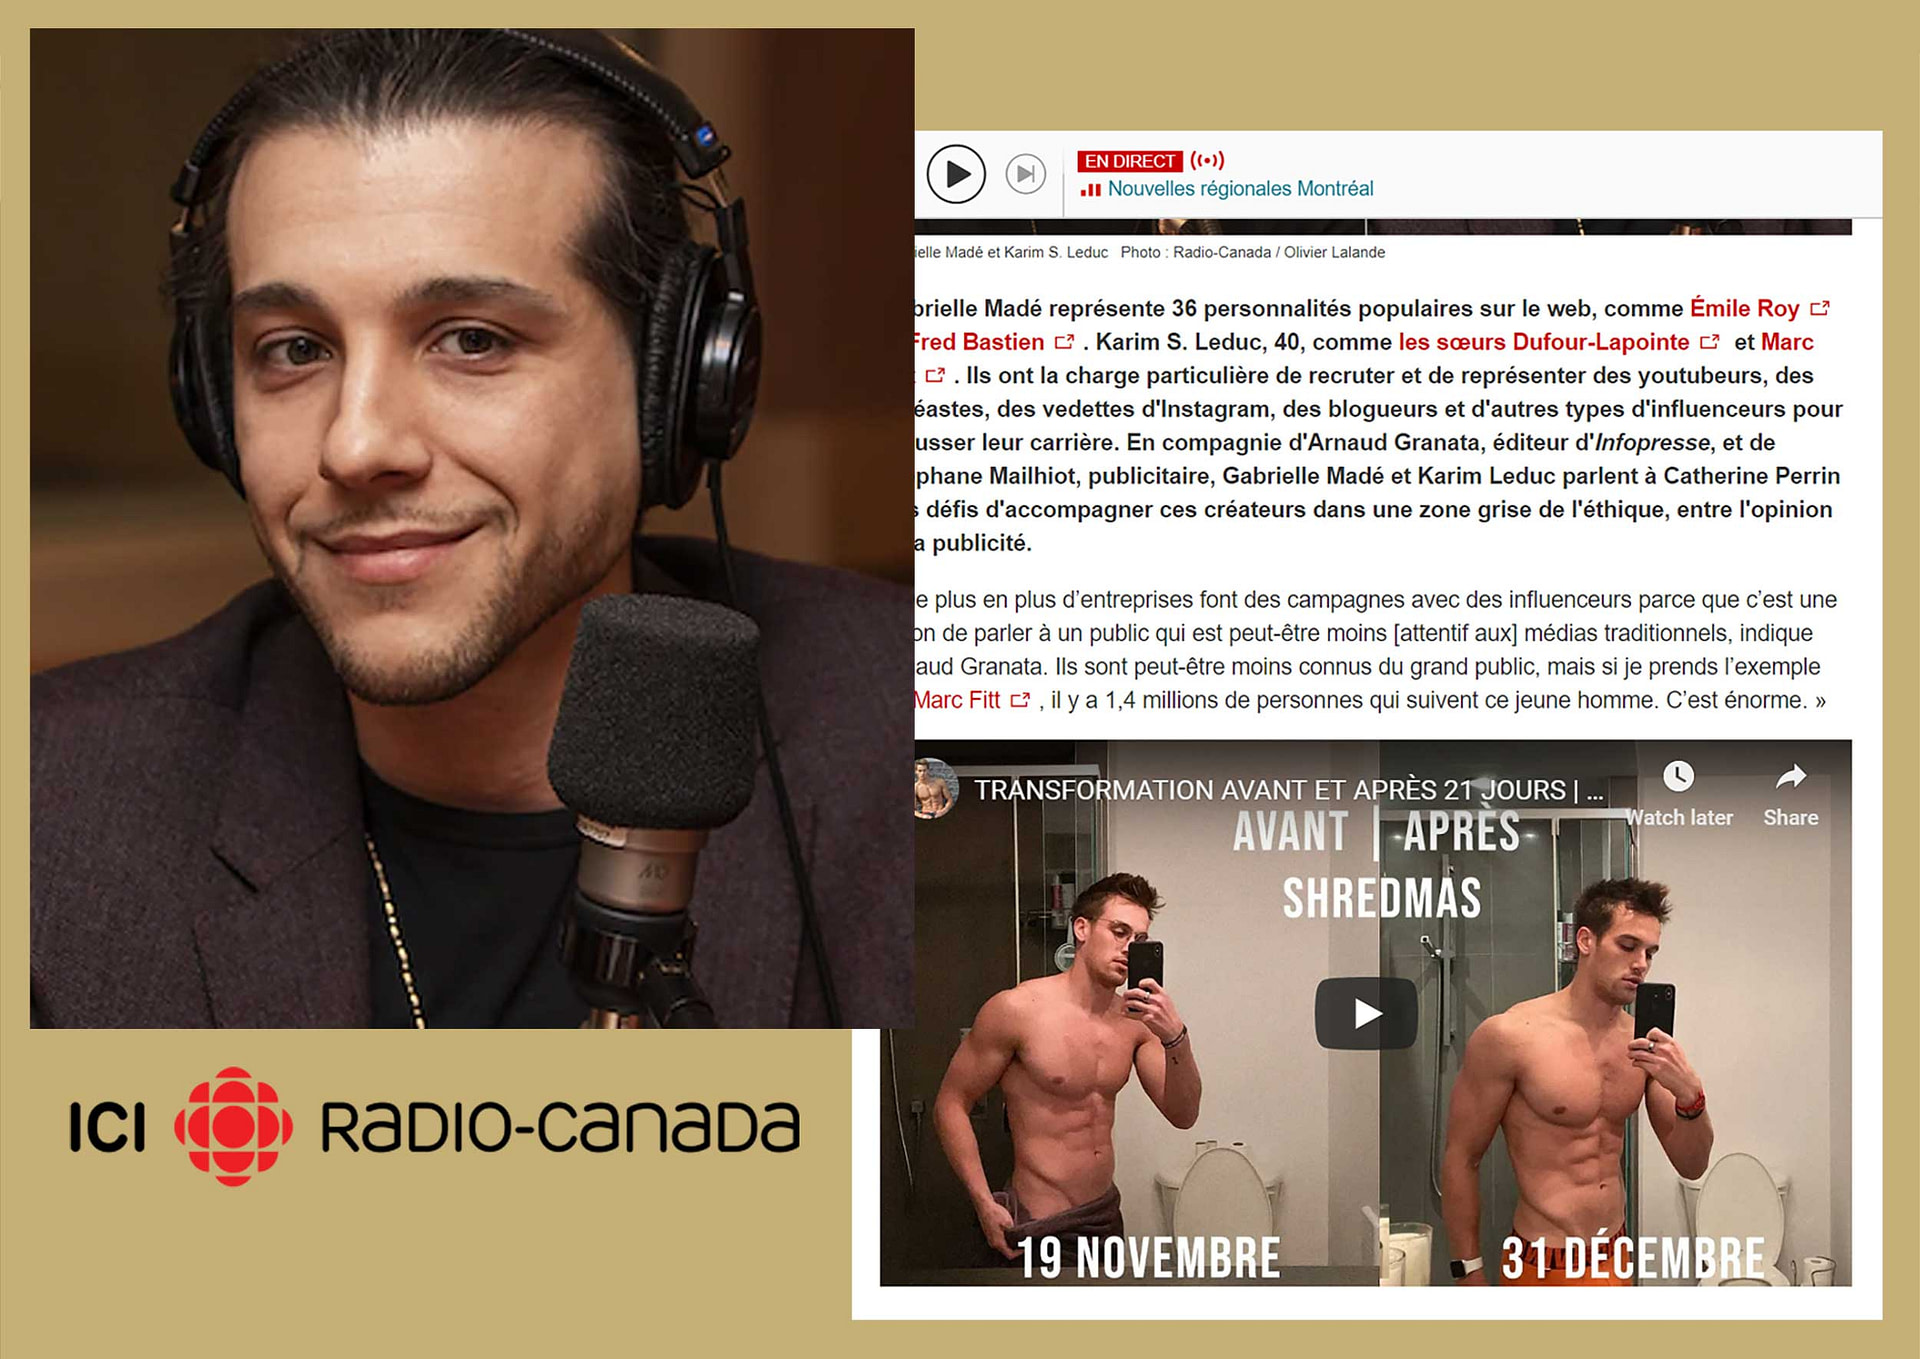 Our CEO invited to speak on Radio Canada about Influencer Marketing